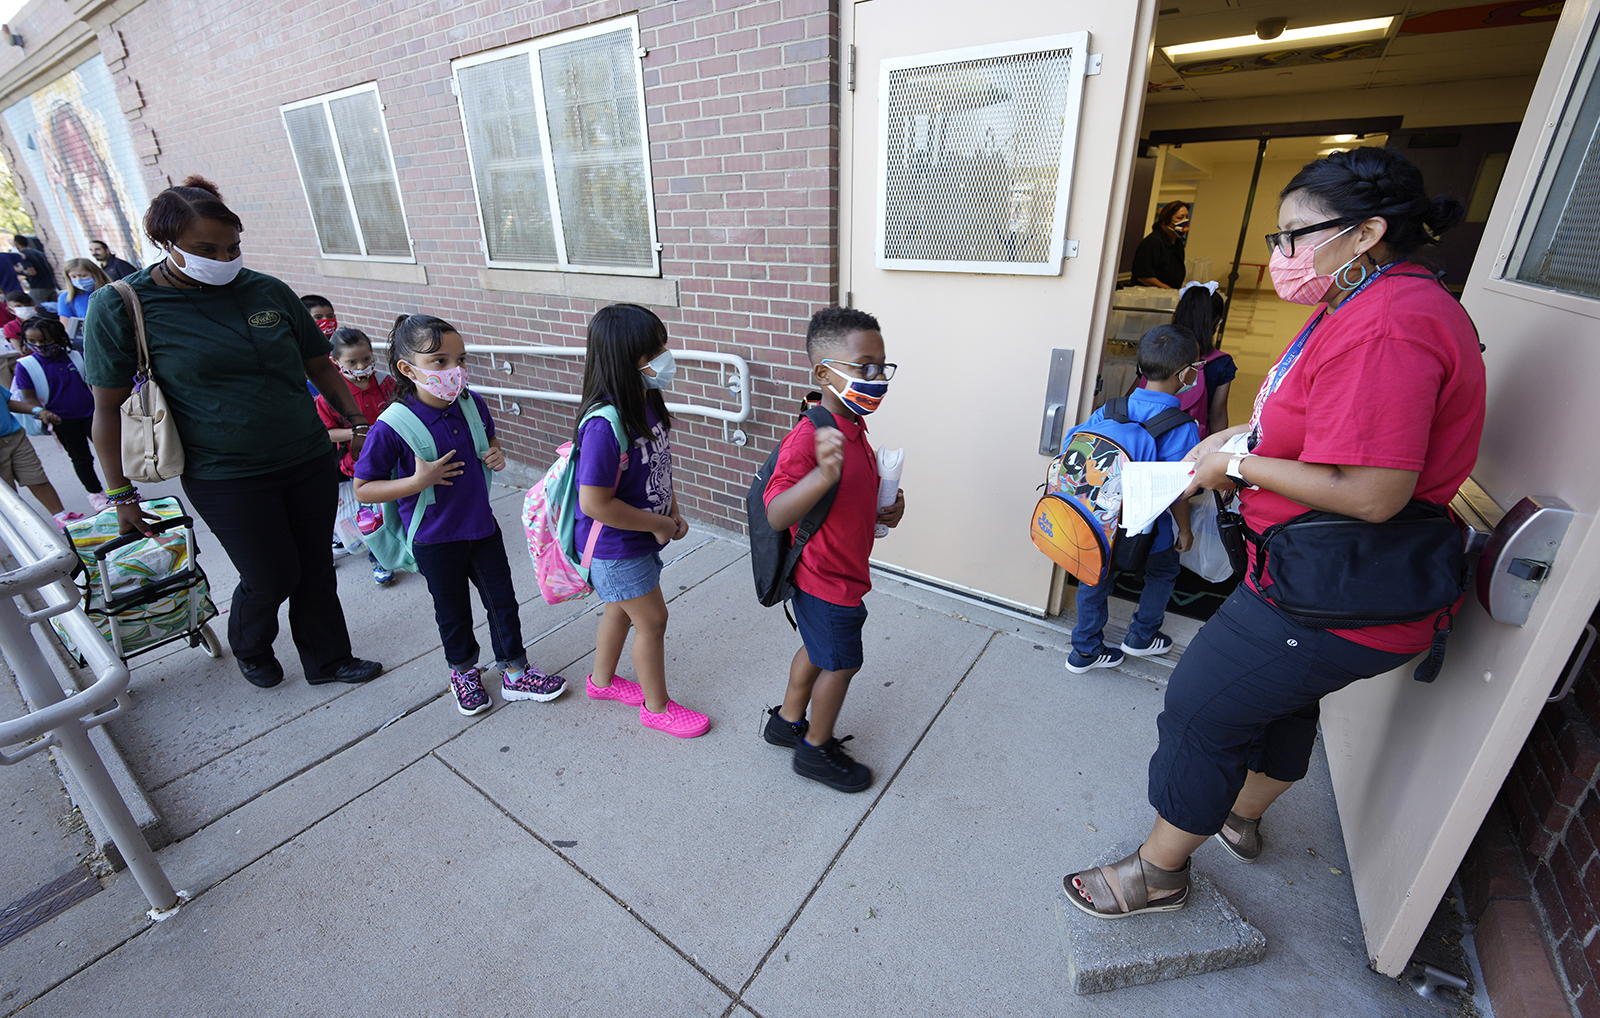 Students in masks start their first day of in-class learning since the start of the pandemic at Garden Place Elementary School on Monday, Aug. 23, 2021, in north Denver. 